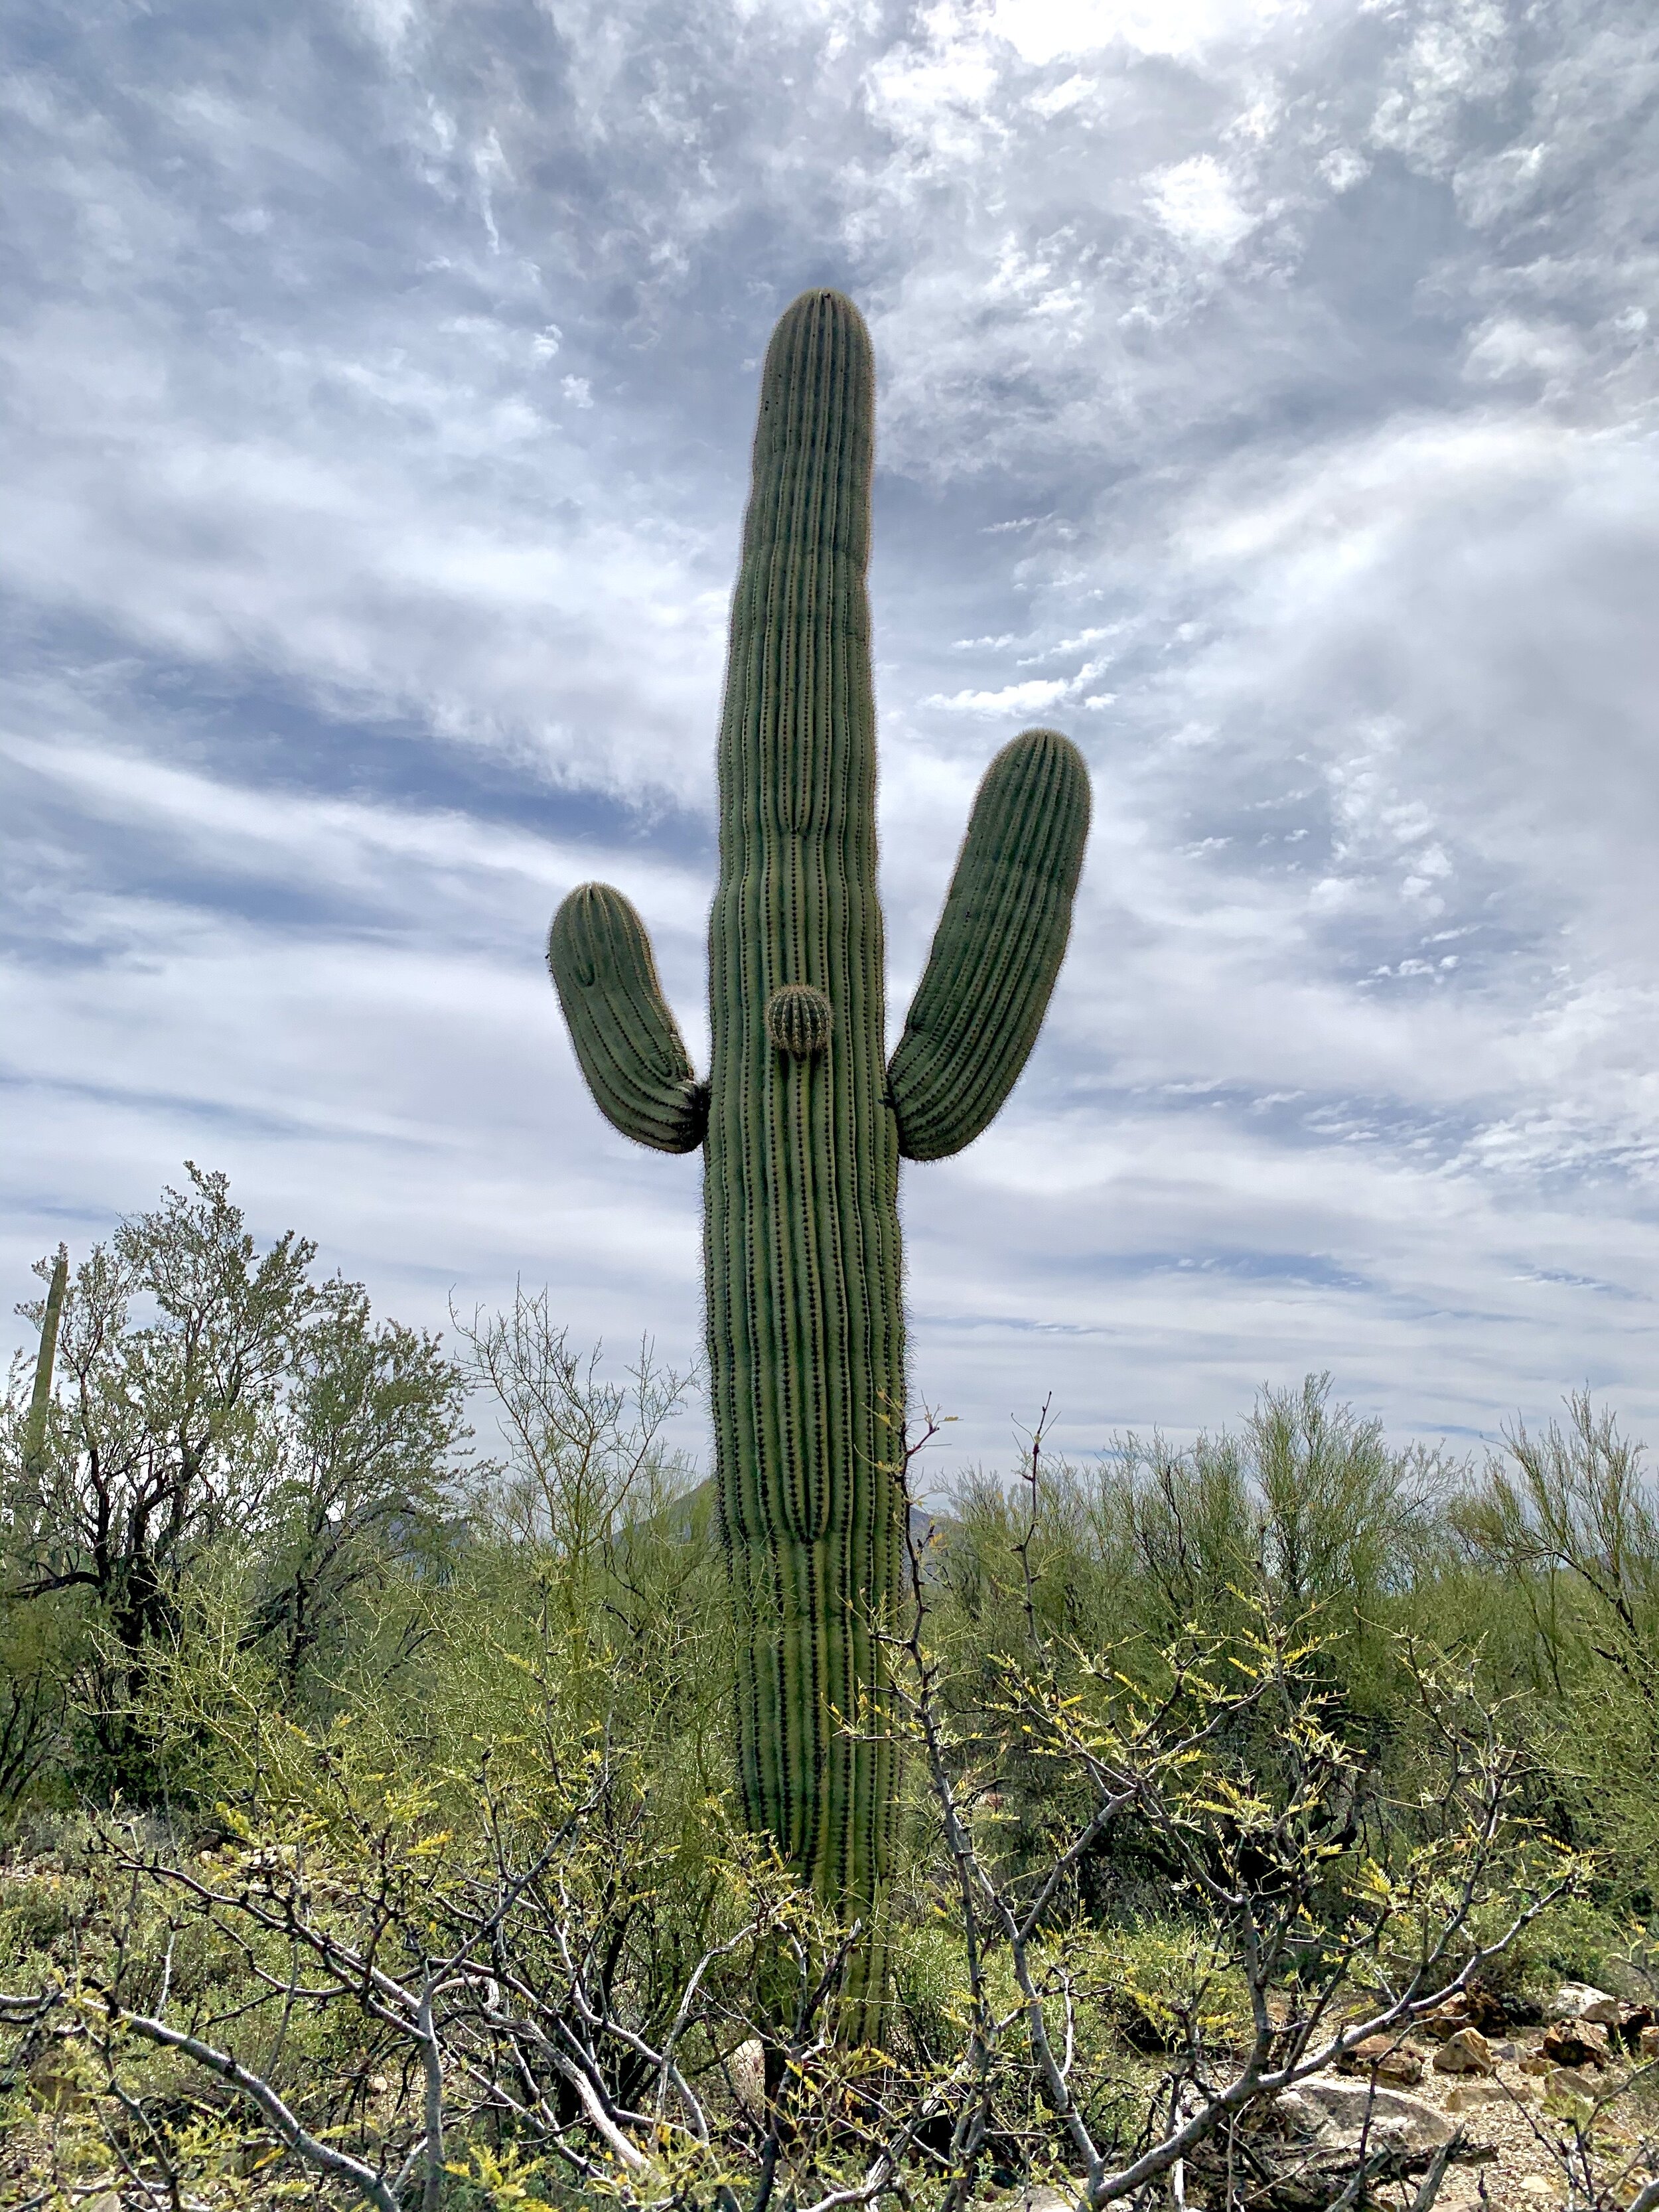  The saguaro cactus is pretty amazing. It can take 10 years to reach 1 inch in height and may take 70 years to reach 6 feet. After 95-100 years the cactus may grow its first arm. In the spring they produce beautiful flowers which are the Arizona stat